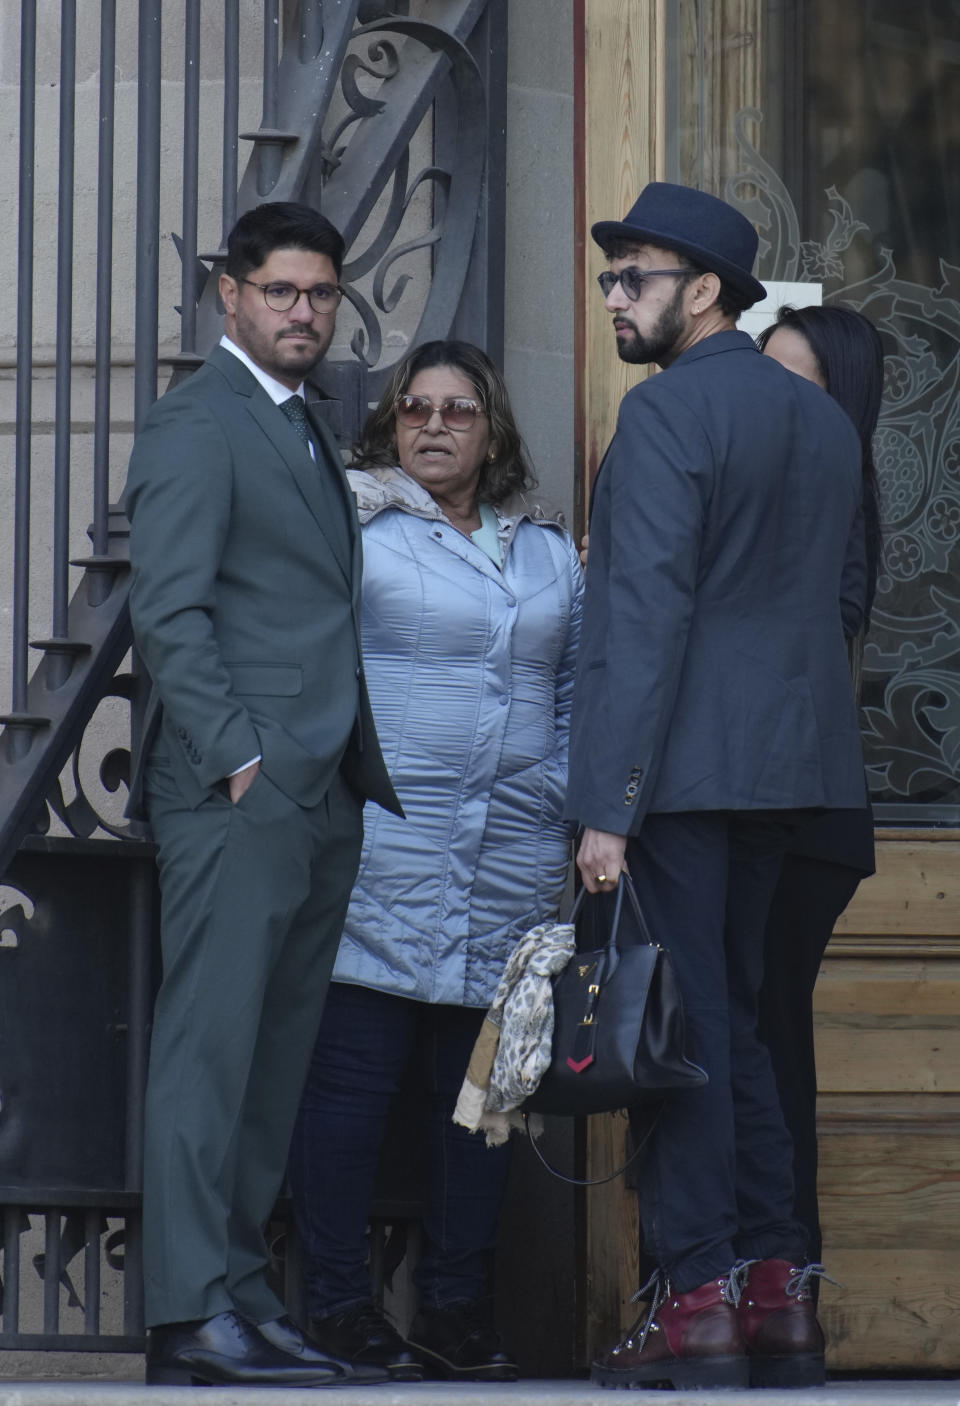 Brazilian soccer star Dani Alves' mother Lucia, centre stands outside the court before the start of a trial in Barcelona, Spain, Monday, Feb. 5, 2024. Dani Alves is on trial for allegedly sexually assaulting a young woman at a Barcelona night club in December 2022 and has spent the past year in pre-trial jail after his bail requests were rejected. He denies any wrongdoing. (AP Photo/Emilio Morenatti)